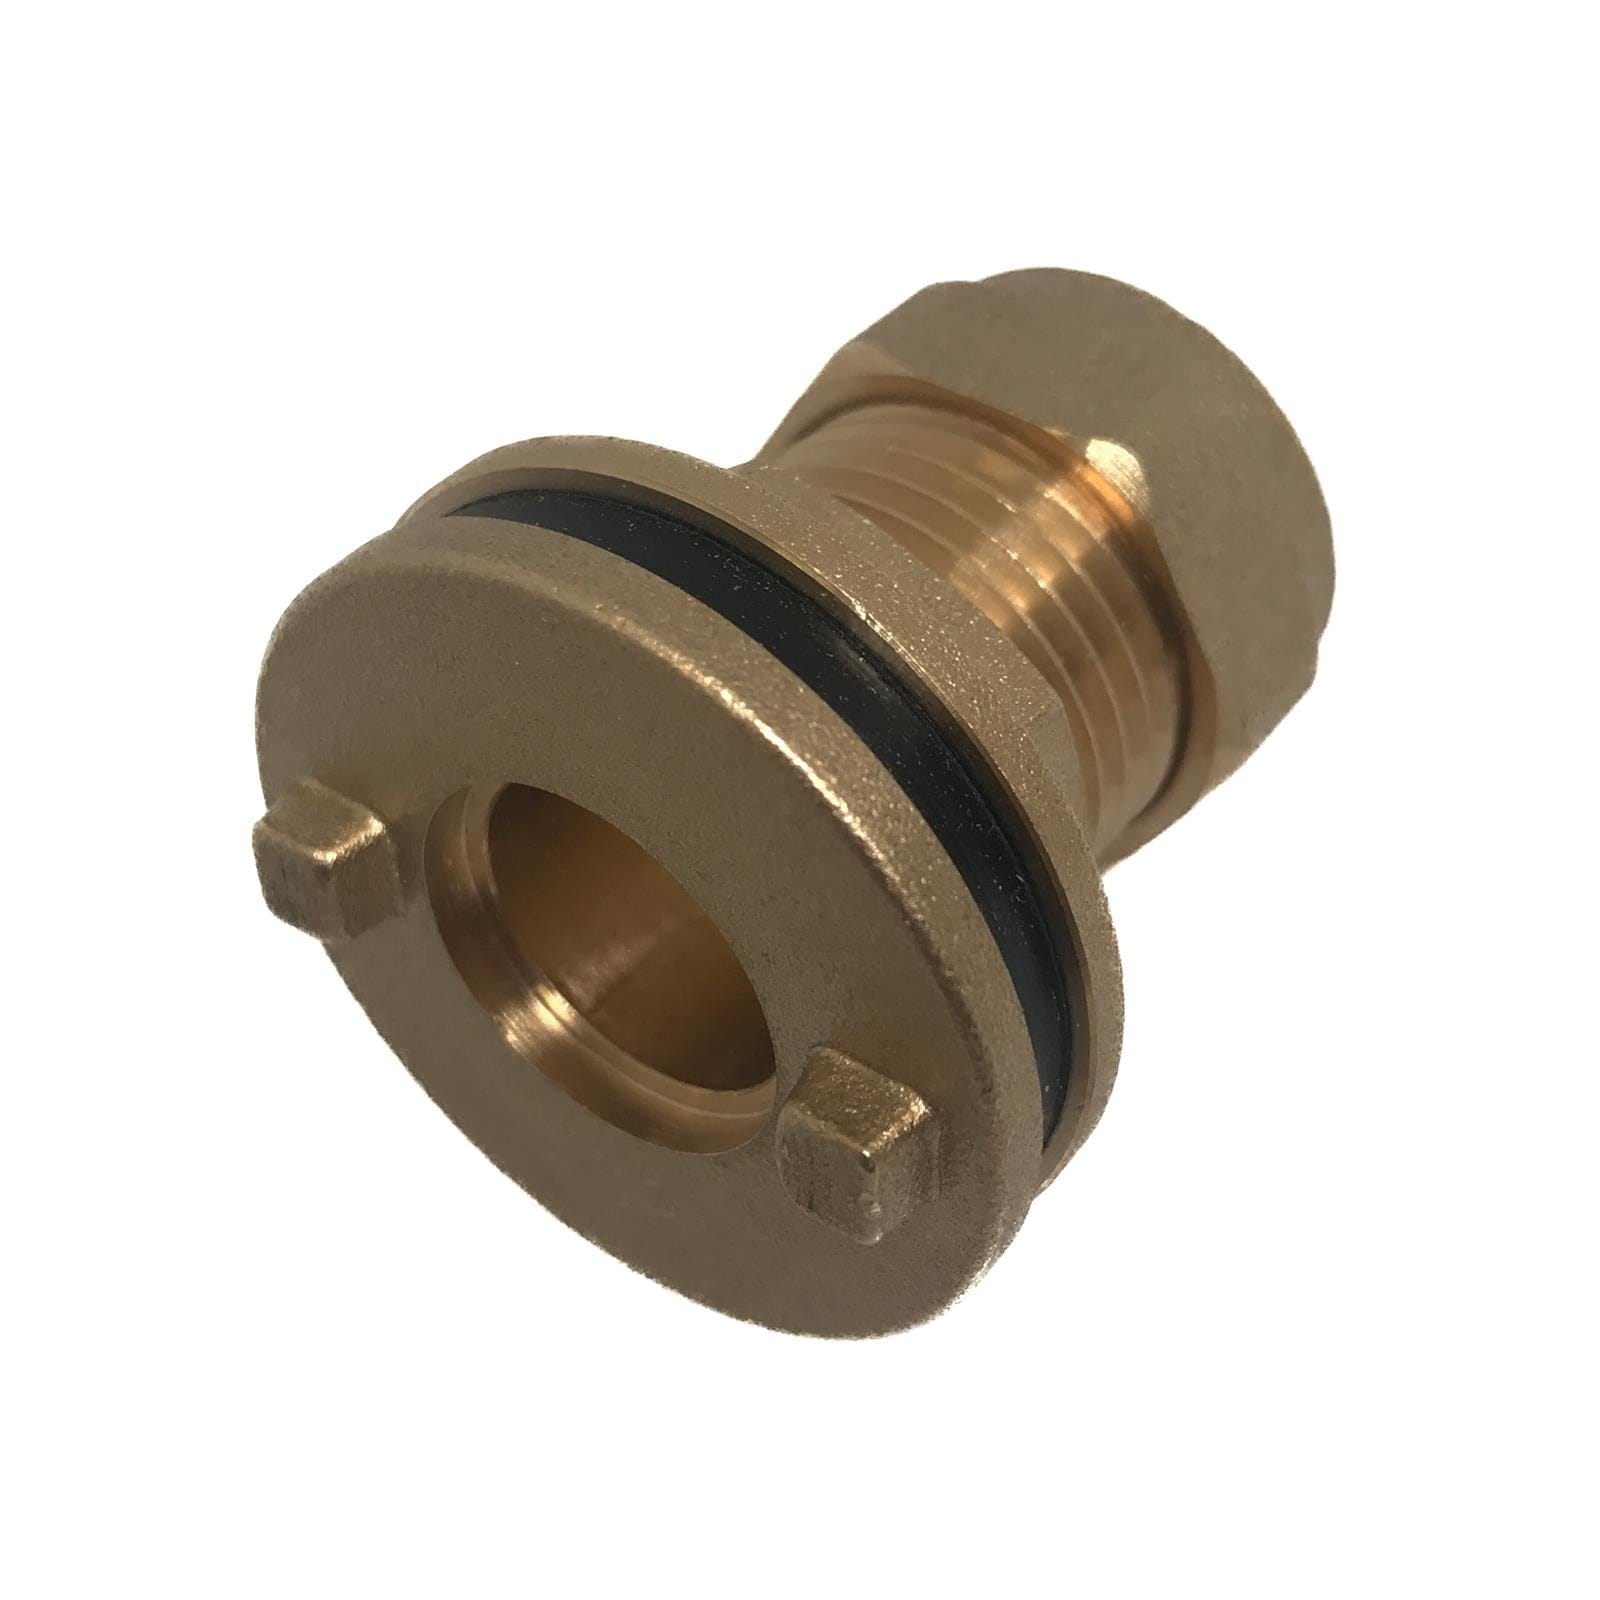 PC05 Tank Connector 15mm Compression Brass Plumbing Fitting Service Item Thunderfix 902286